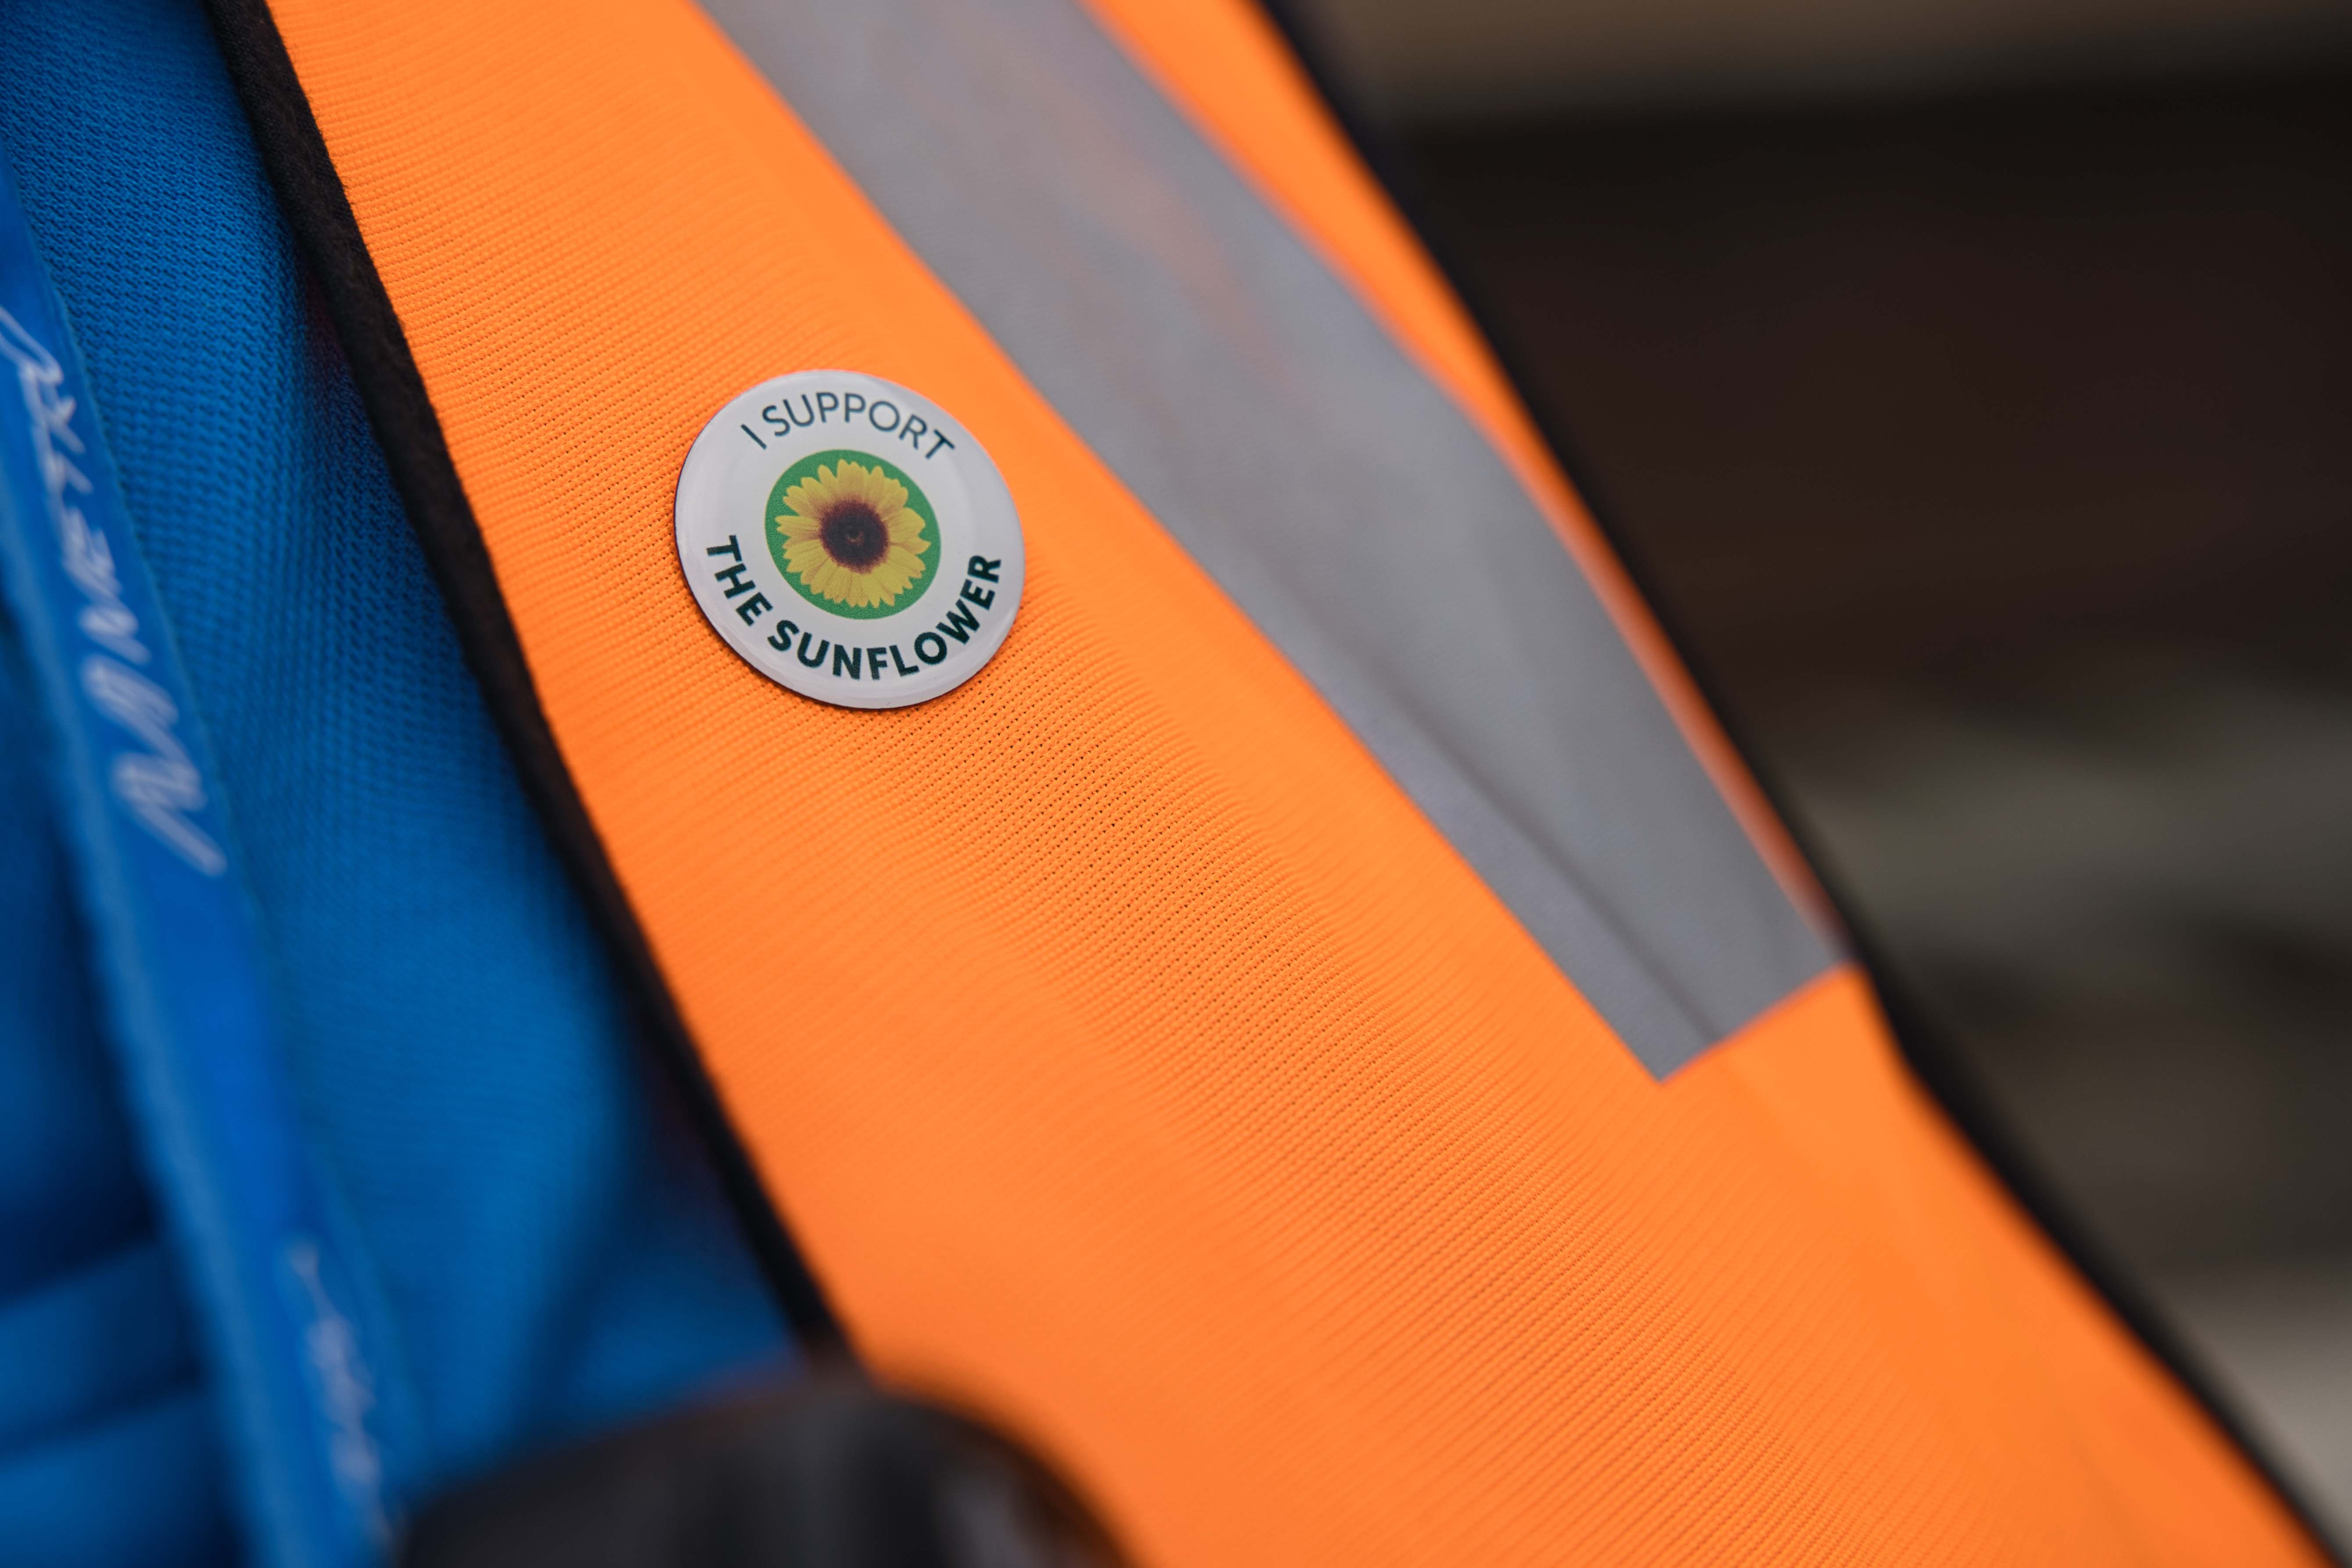 A Metro staff member wearing a Sunflower supporter badge